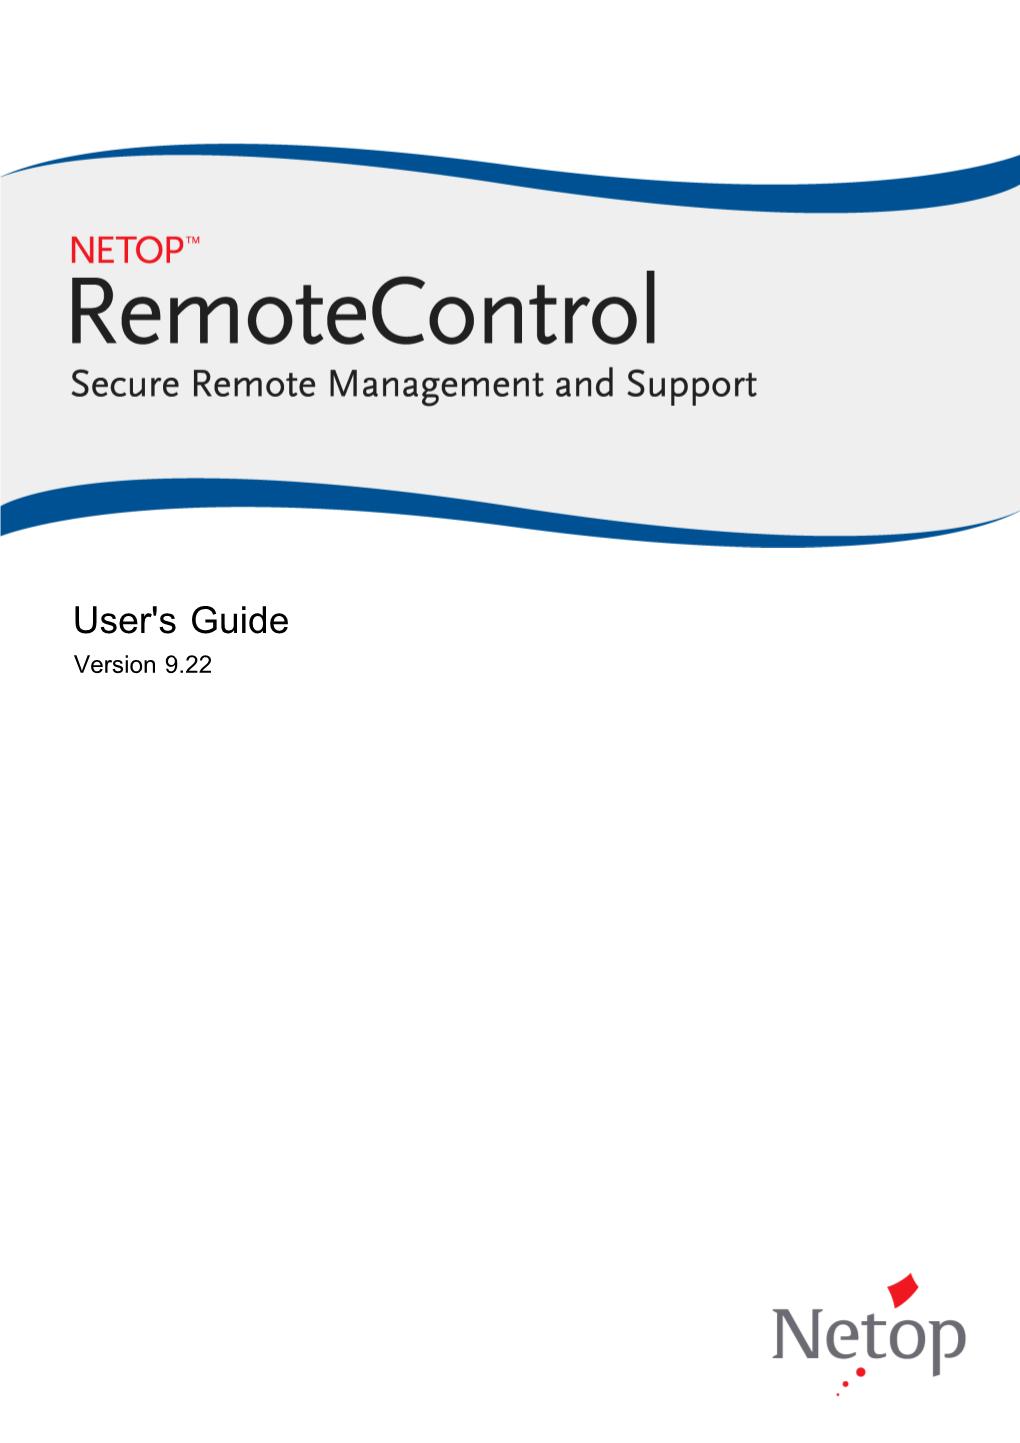 Netop Remote Control, the Remote Control Software from Netop